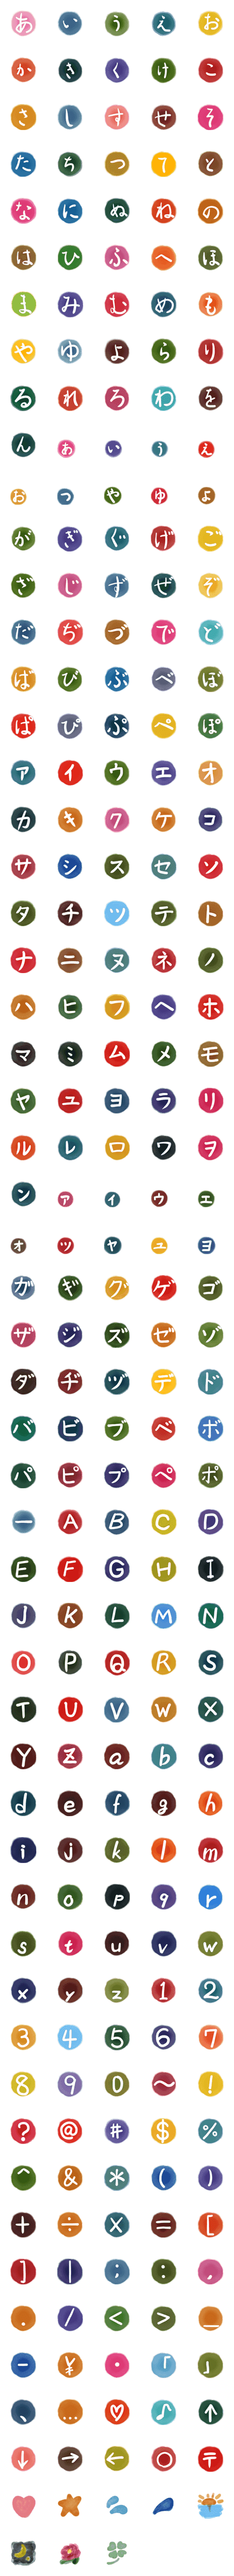 [LINE絵文字]水玉に入った文字の画像一覧